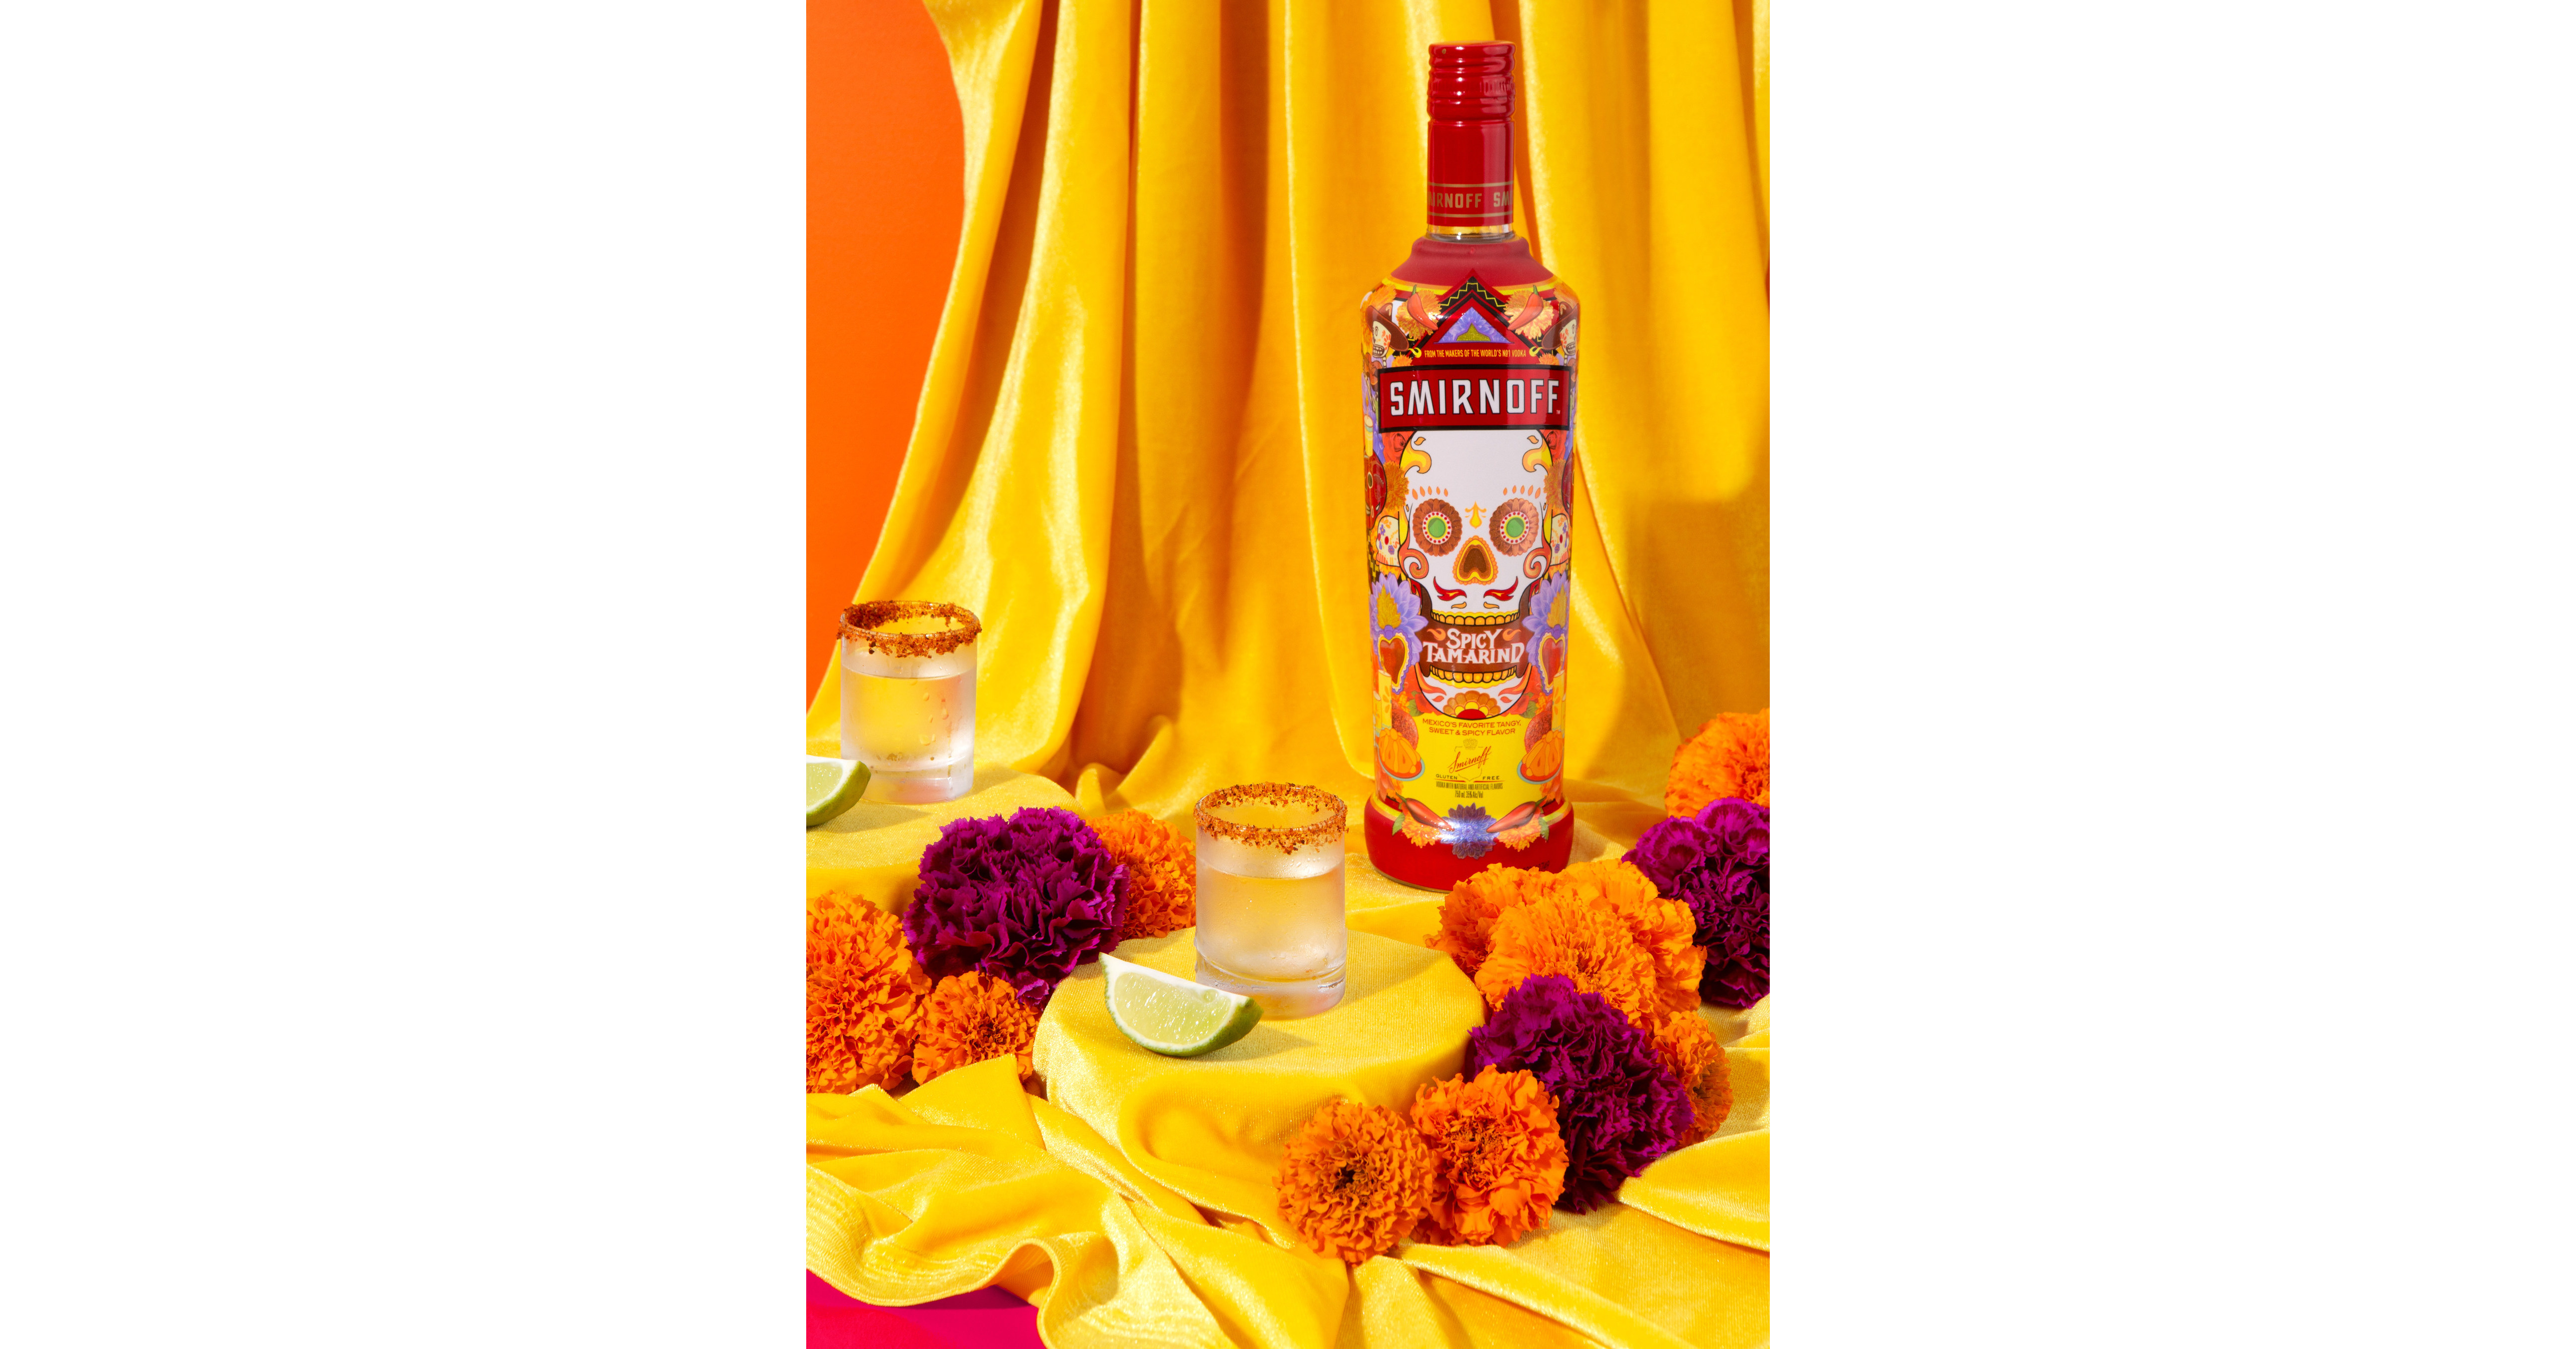 Proudly Sweet Shamelessly Spicy Smirnoff Is Delivering A Shot Of Authentic Flavor And Expanding Its Spicy Tamarind Offering To More Markets Across The U S